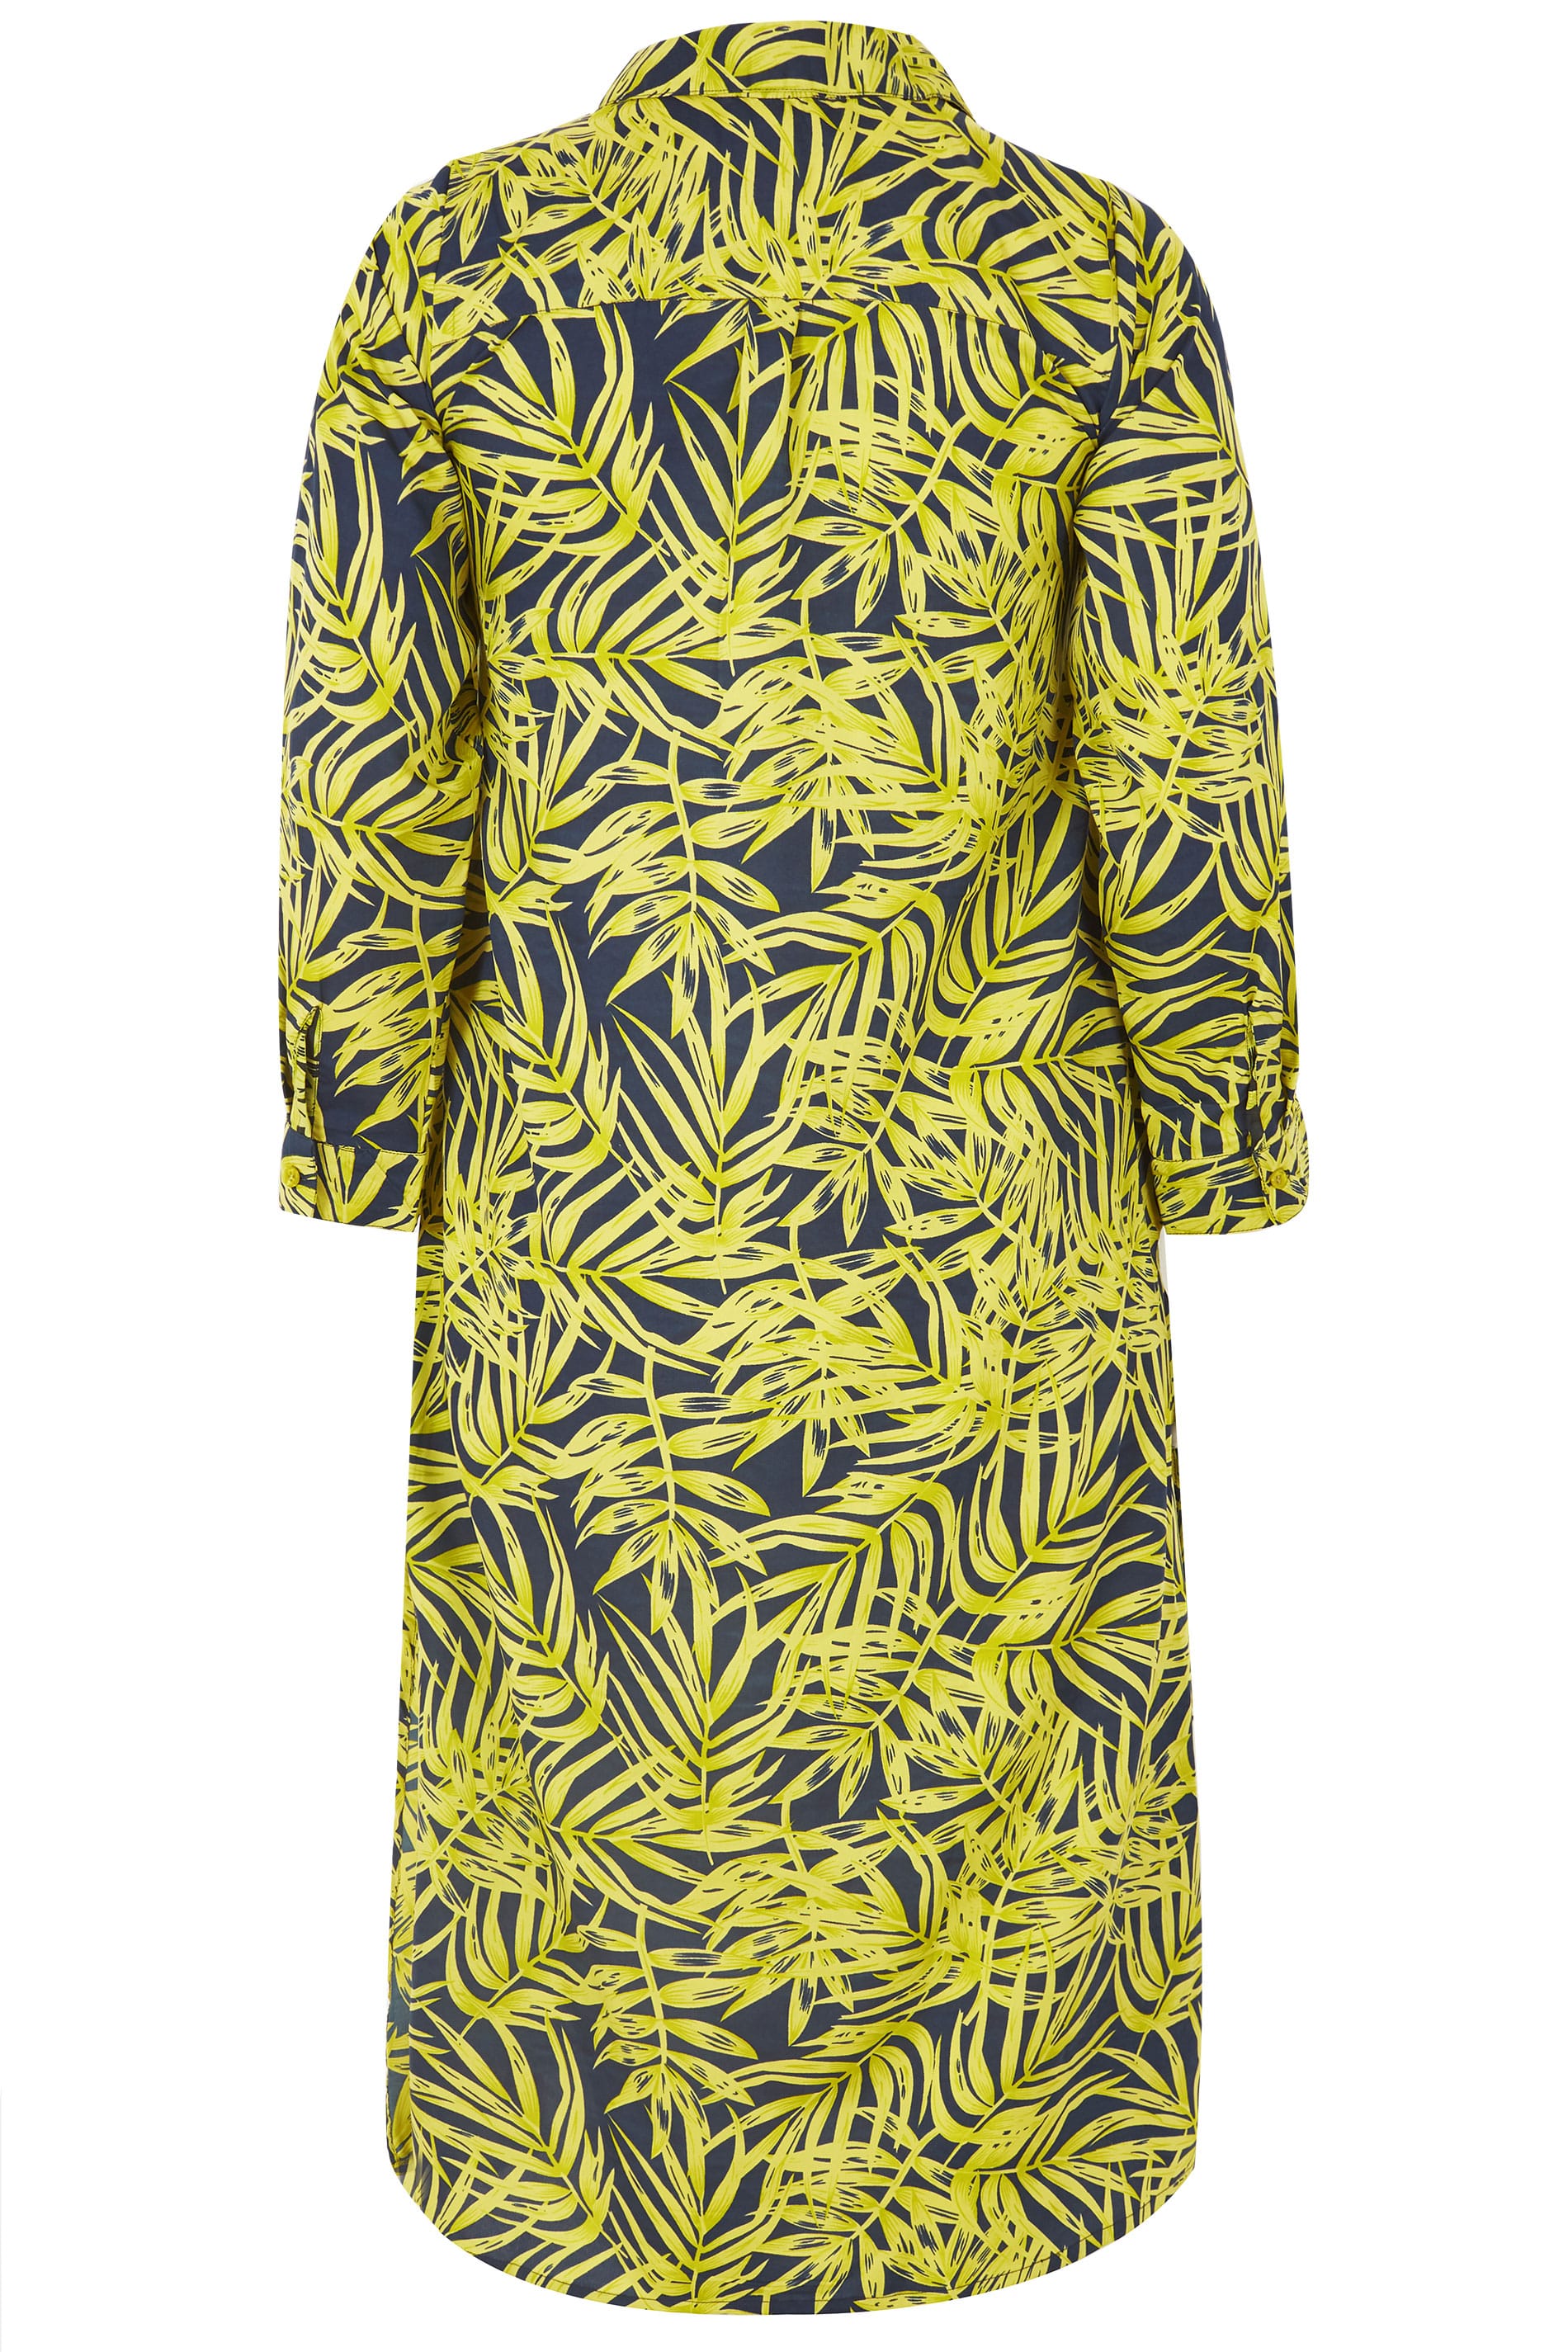 Navy & Lime Green Leaf Print Maxi Shirt, plus size 16 to 36